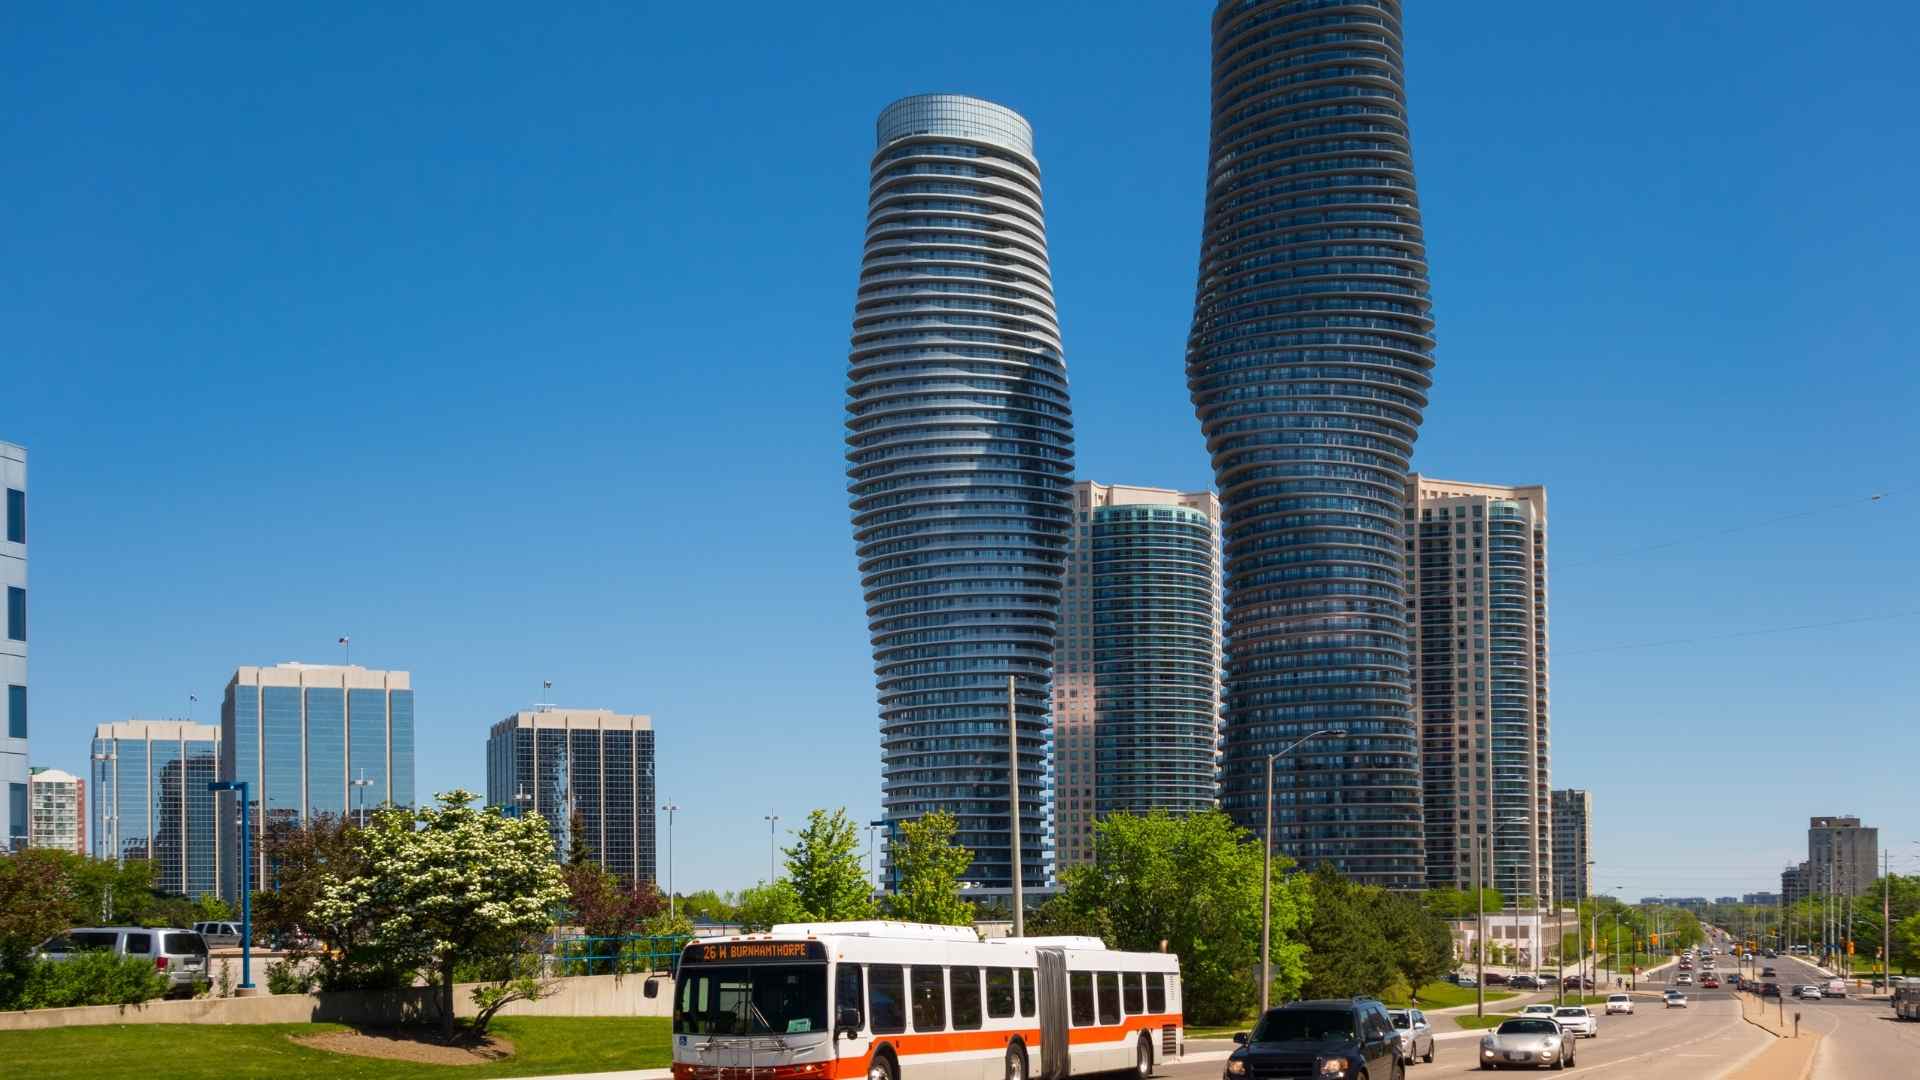 THINGS TO DO IN MISSISSAUGA